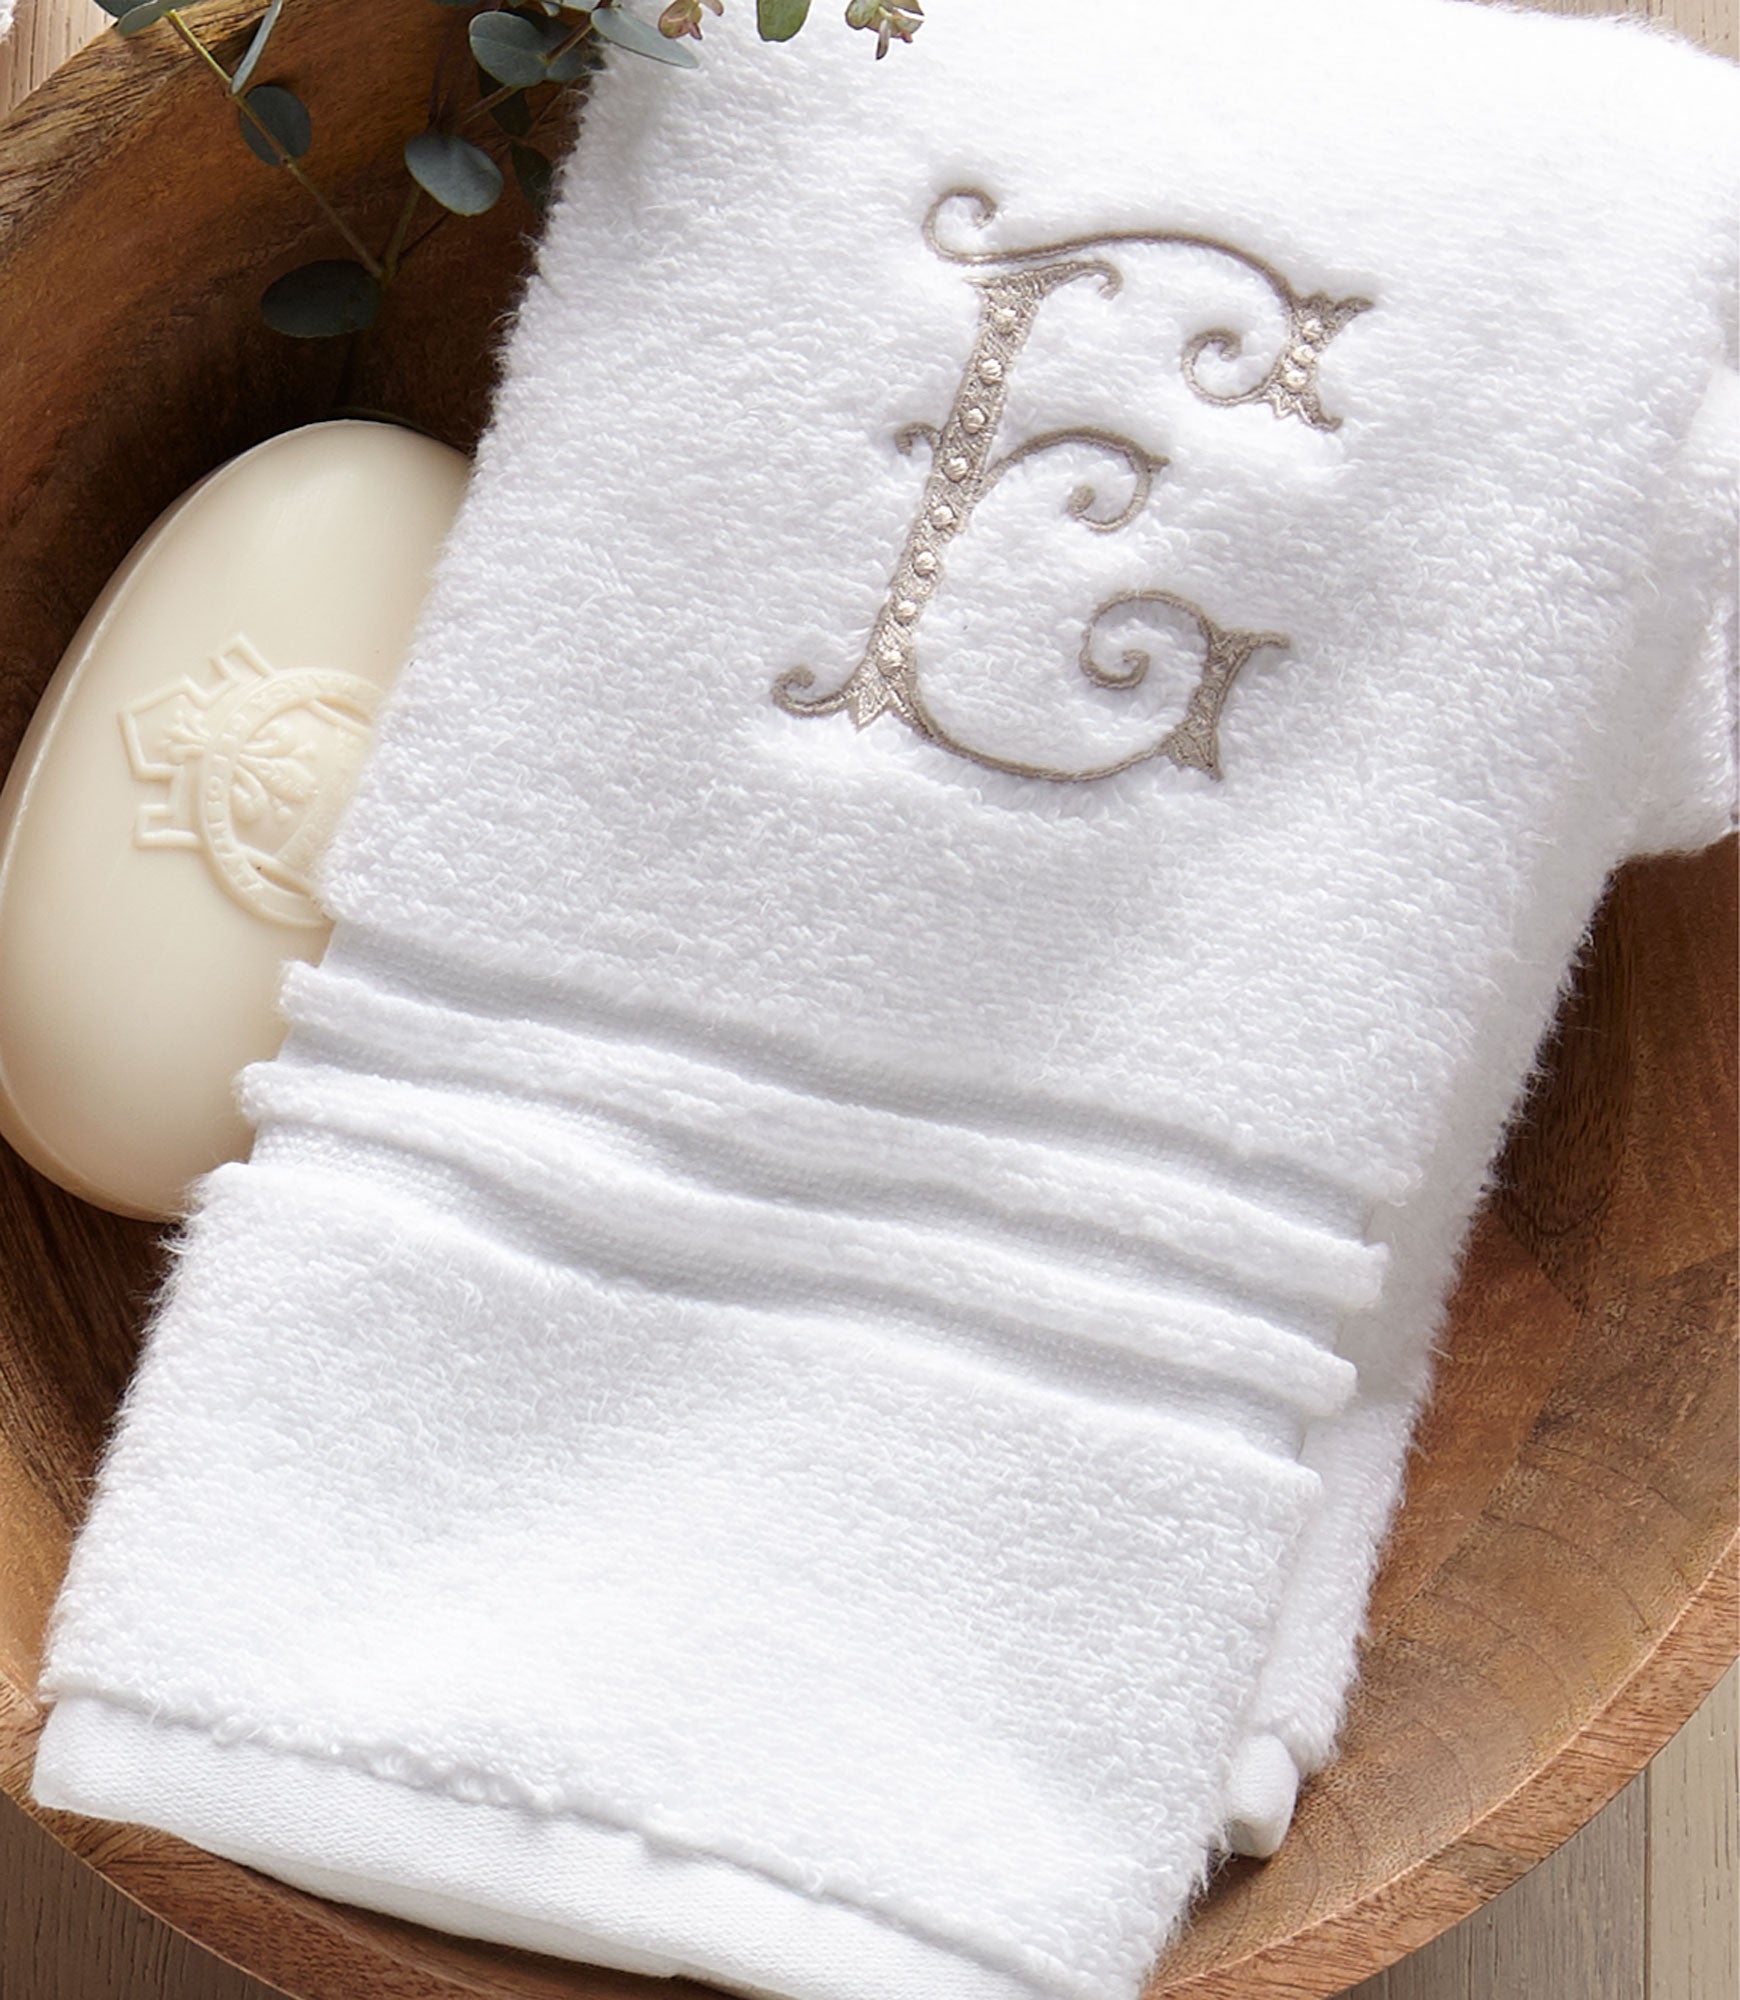 PEACOCK ALLEY Bamboo White Bath Towels - Yvonne Estelle's